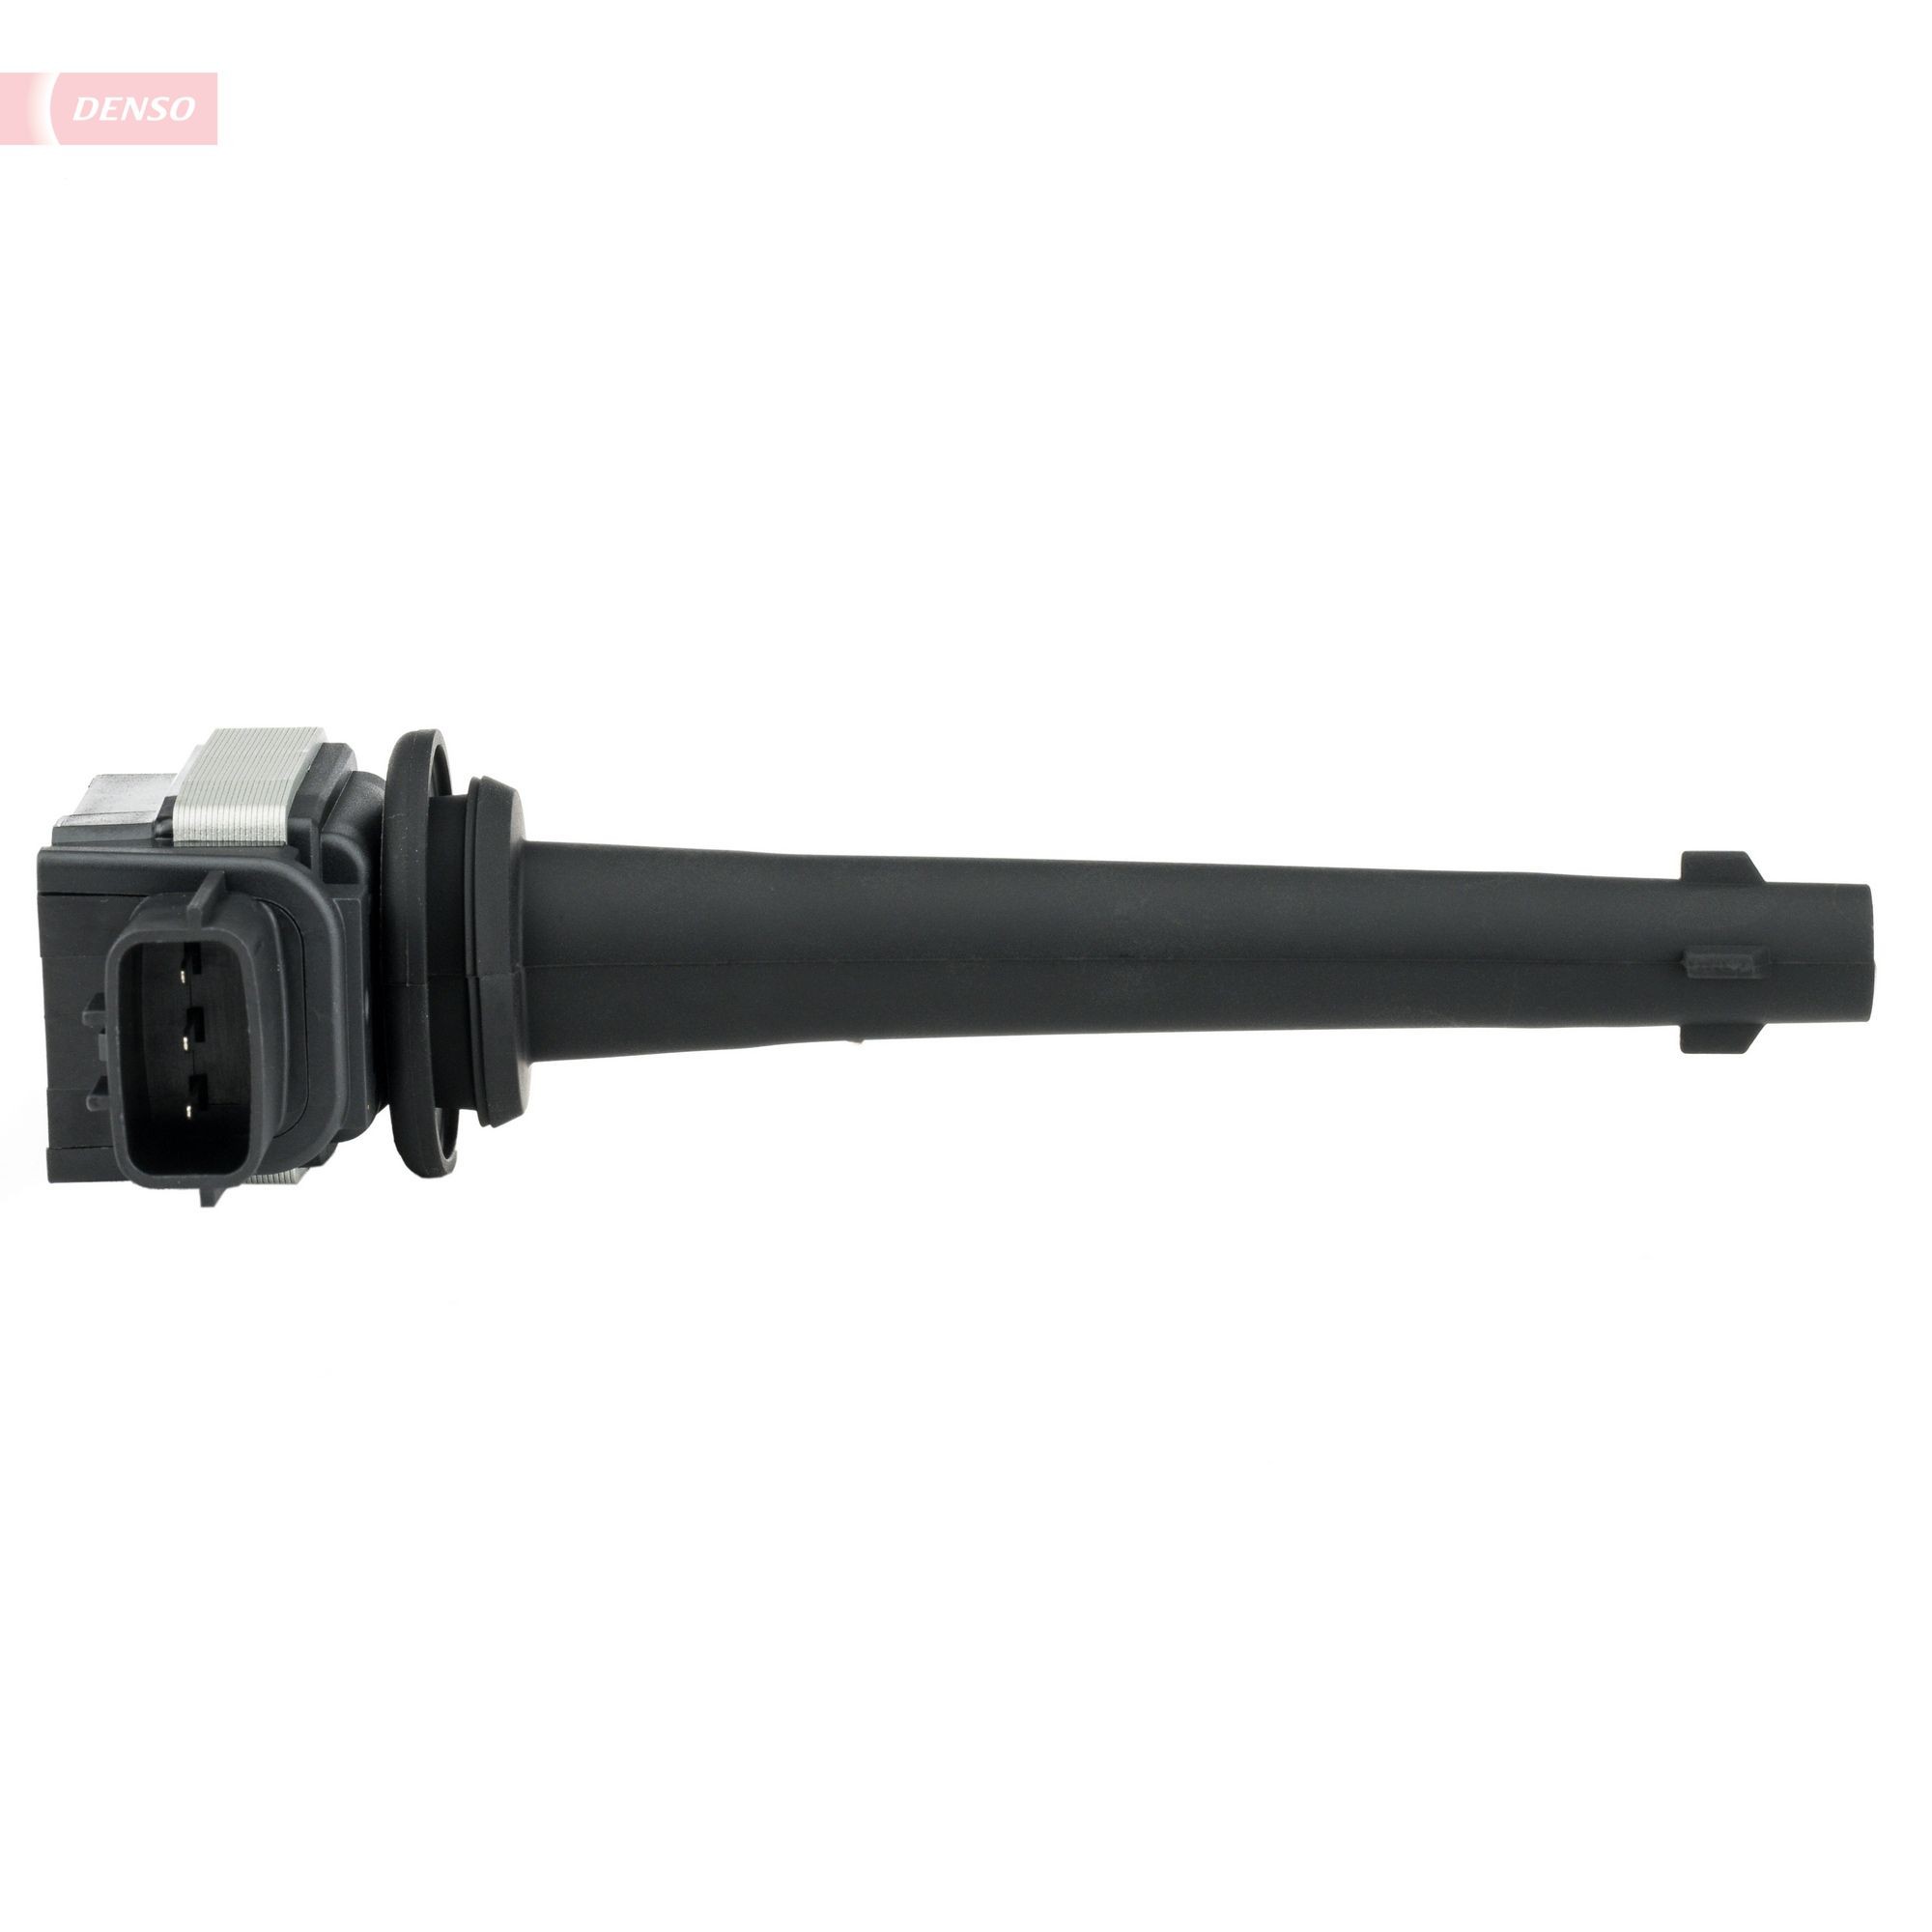 Great value for money - DENSO Ignition coil DIC-0220